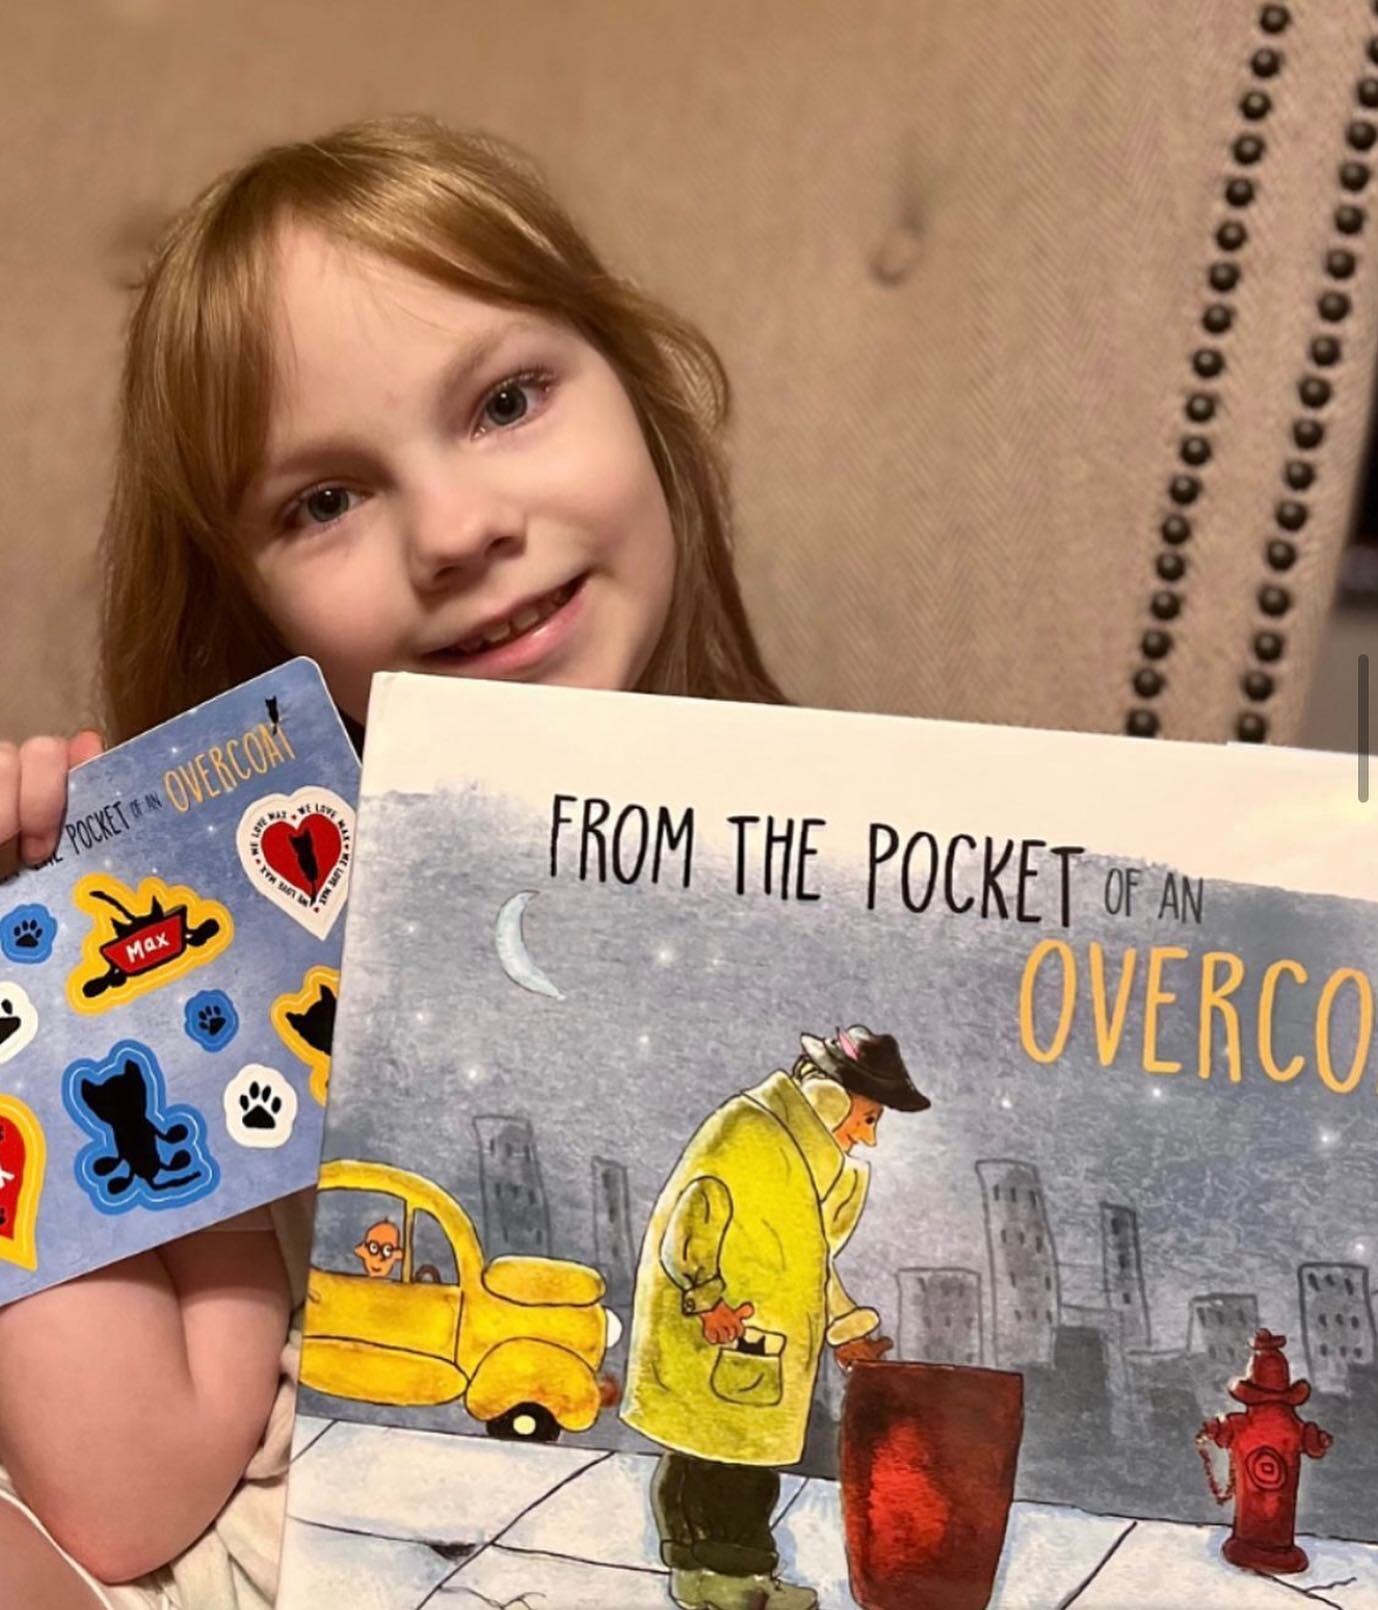 Love seeing our happy #MaxBuckles fans 😃📚 Thank you @startraci for sharing this wonderful photo of Aslyn ☺️ #maxbucklesbooks #readshareenjoymax #fromthepocketofanovercoat